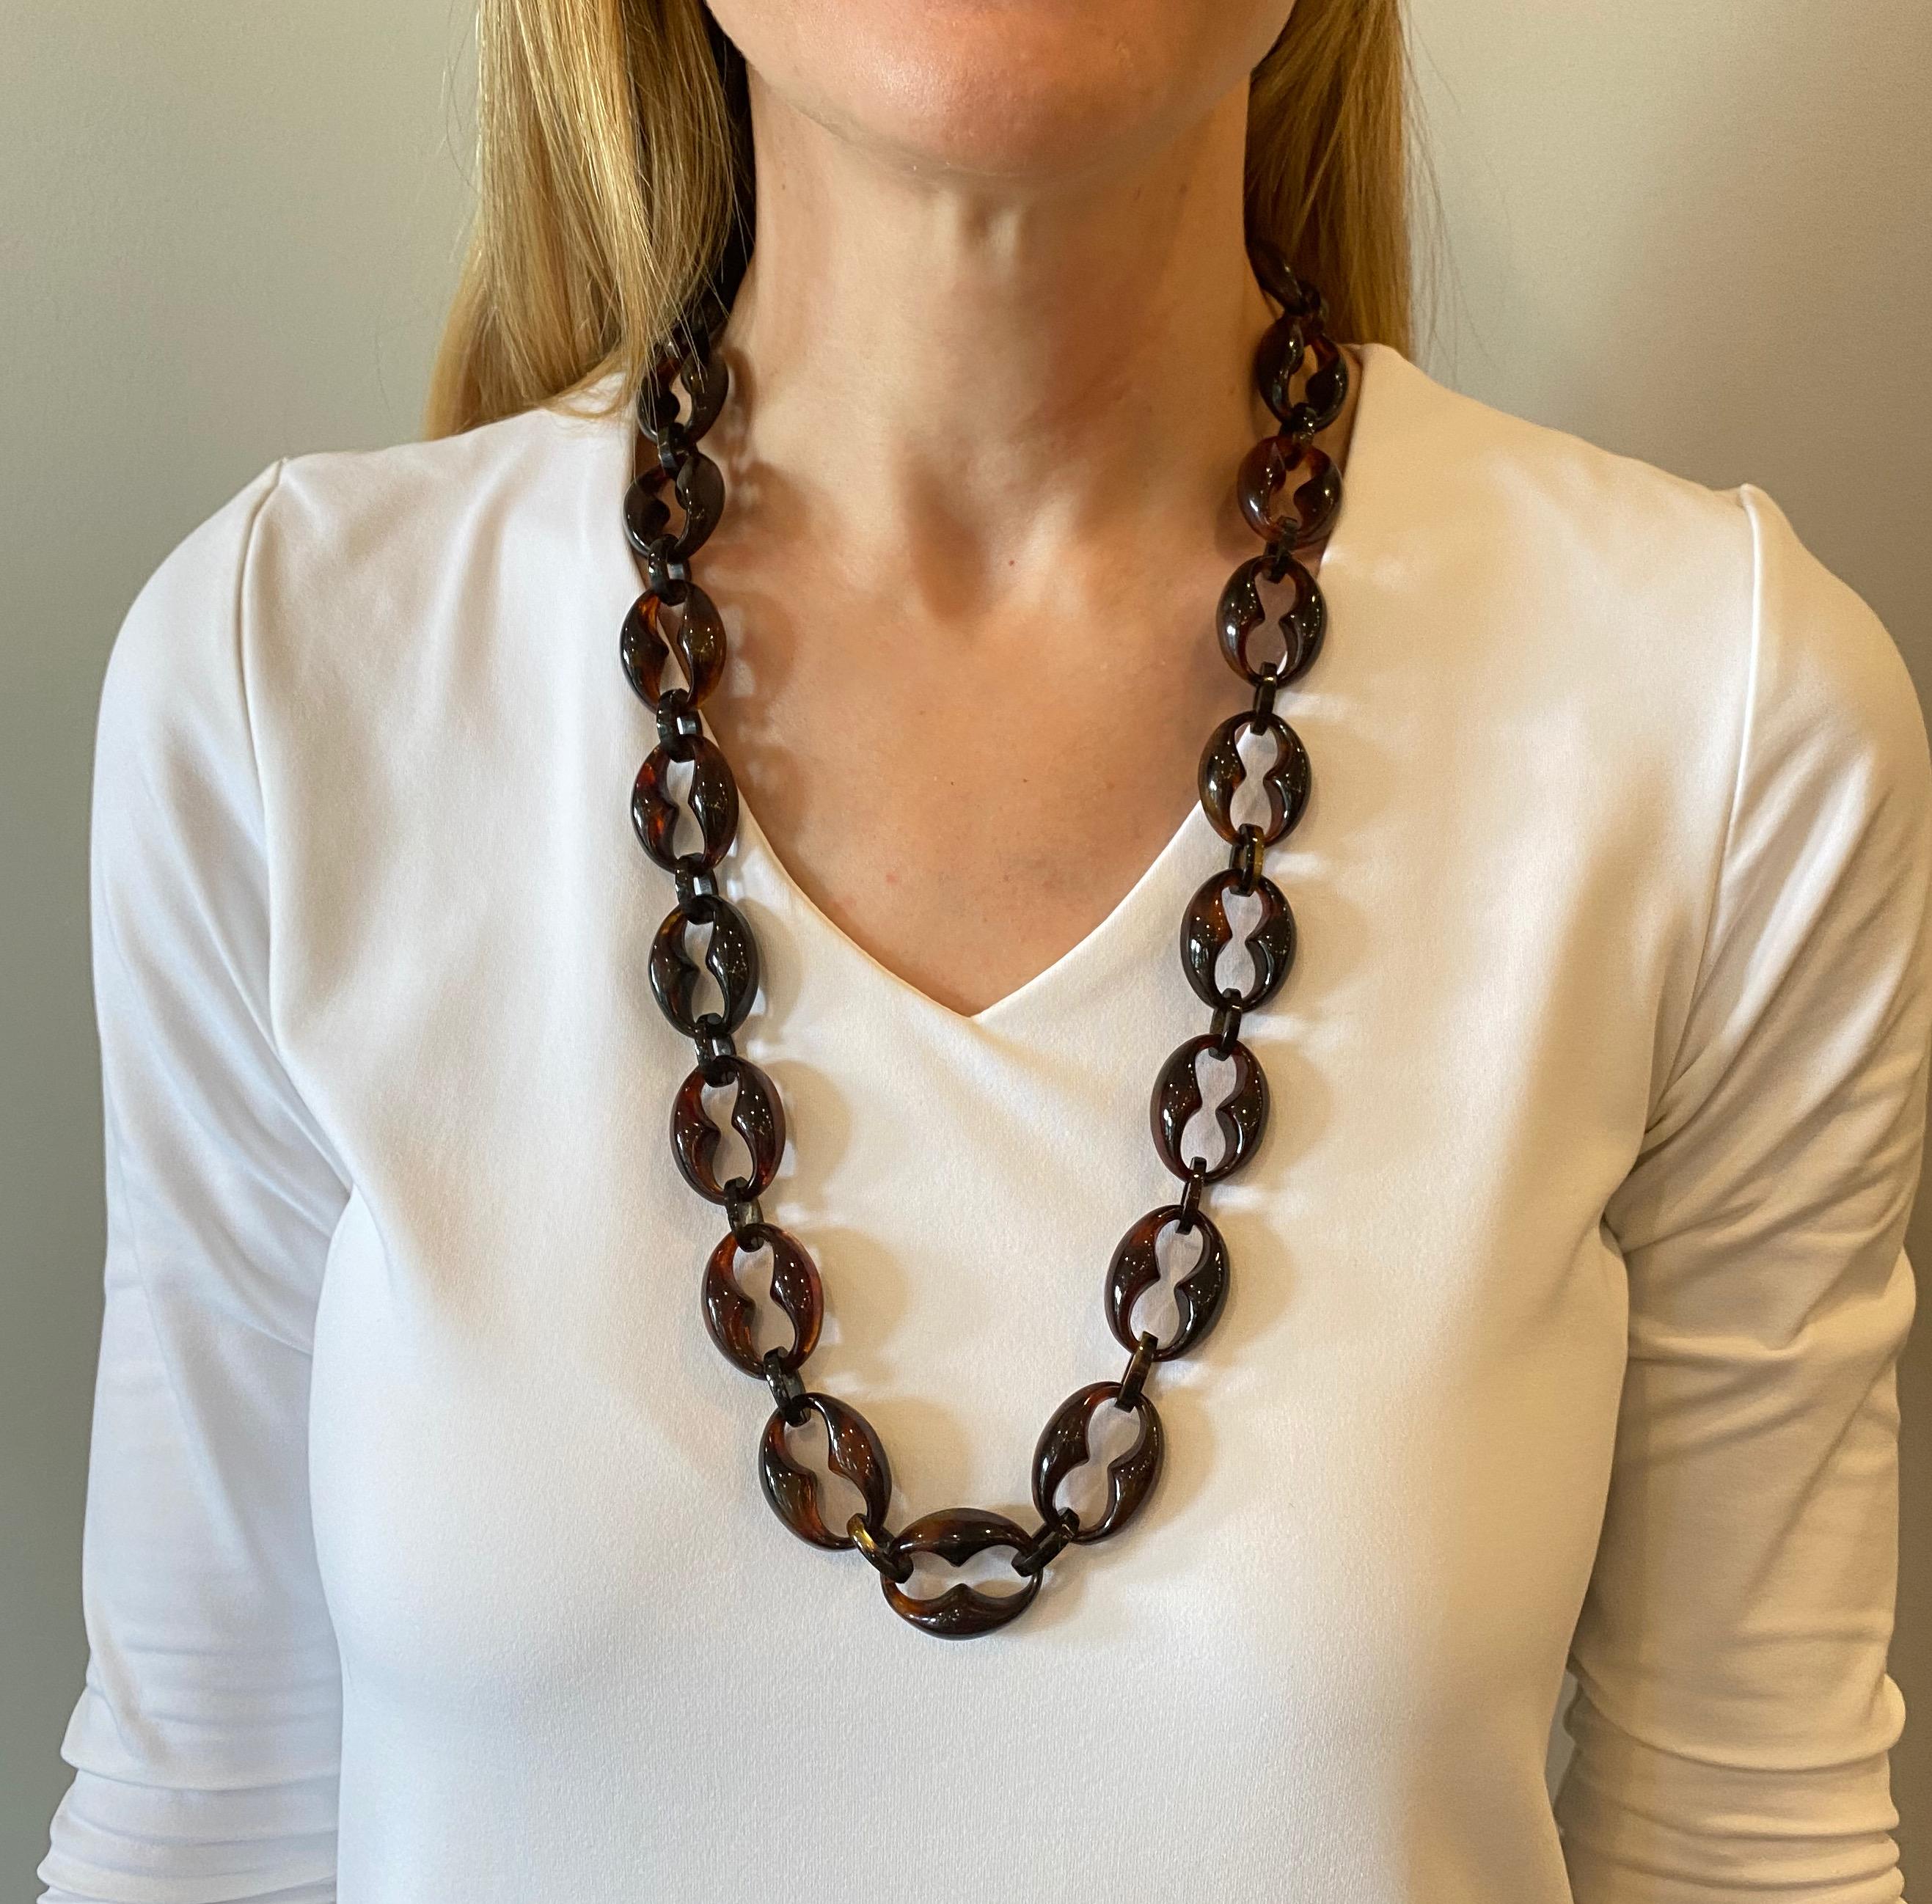 
GIA Report #6227026165

Carved Tortoise shell necklace with the original Gucci link design.

Attestation of age:  dates back to circa 1800s Victorian Era prior to the CITES ban of 1977. 

Measurements:

30.5